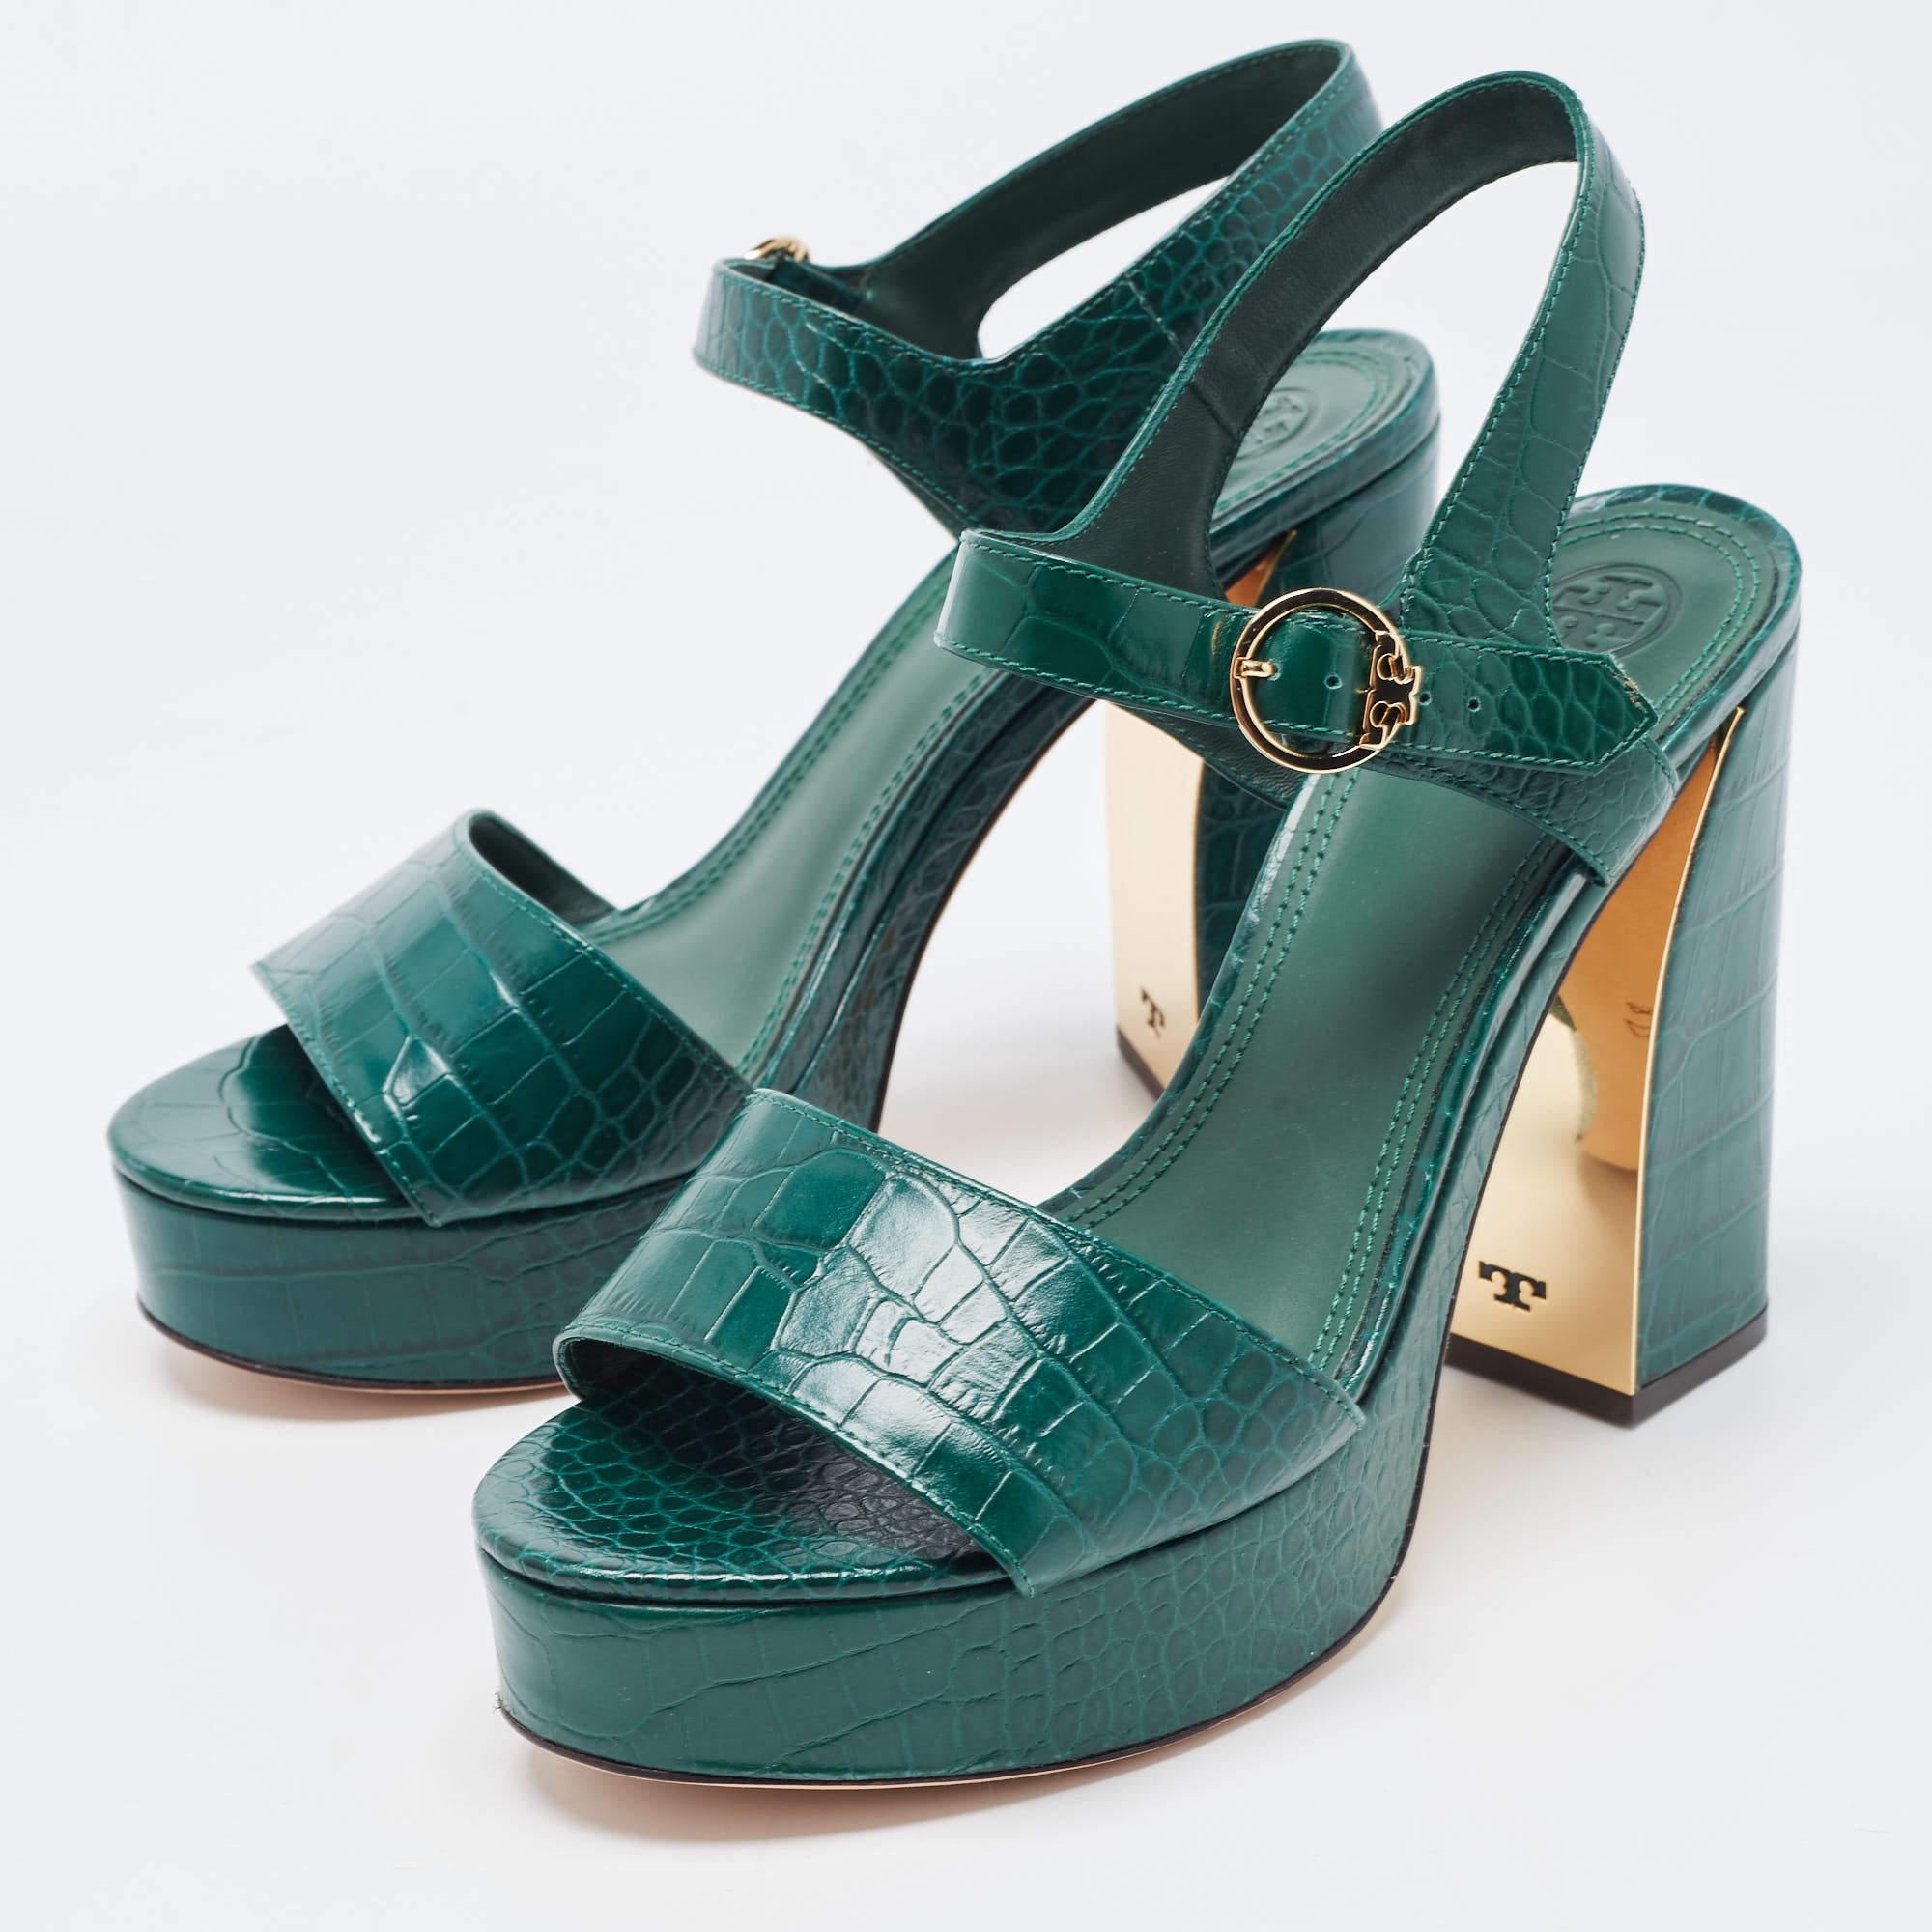 Tory Burch Green Croc Embossed Leather Martine Platform Sandals Size 40 For Sale 2